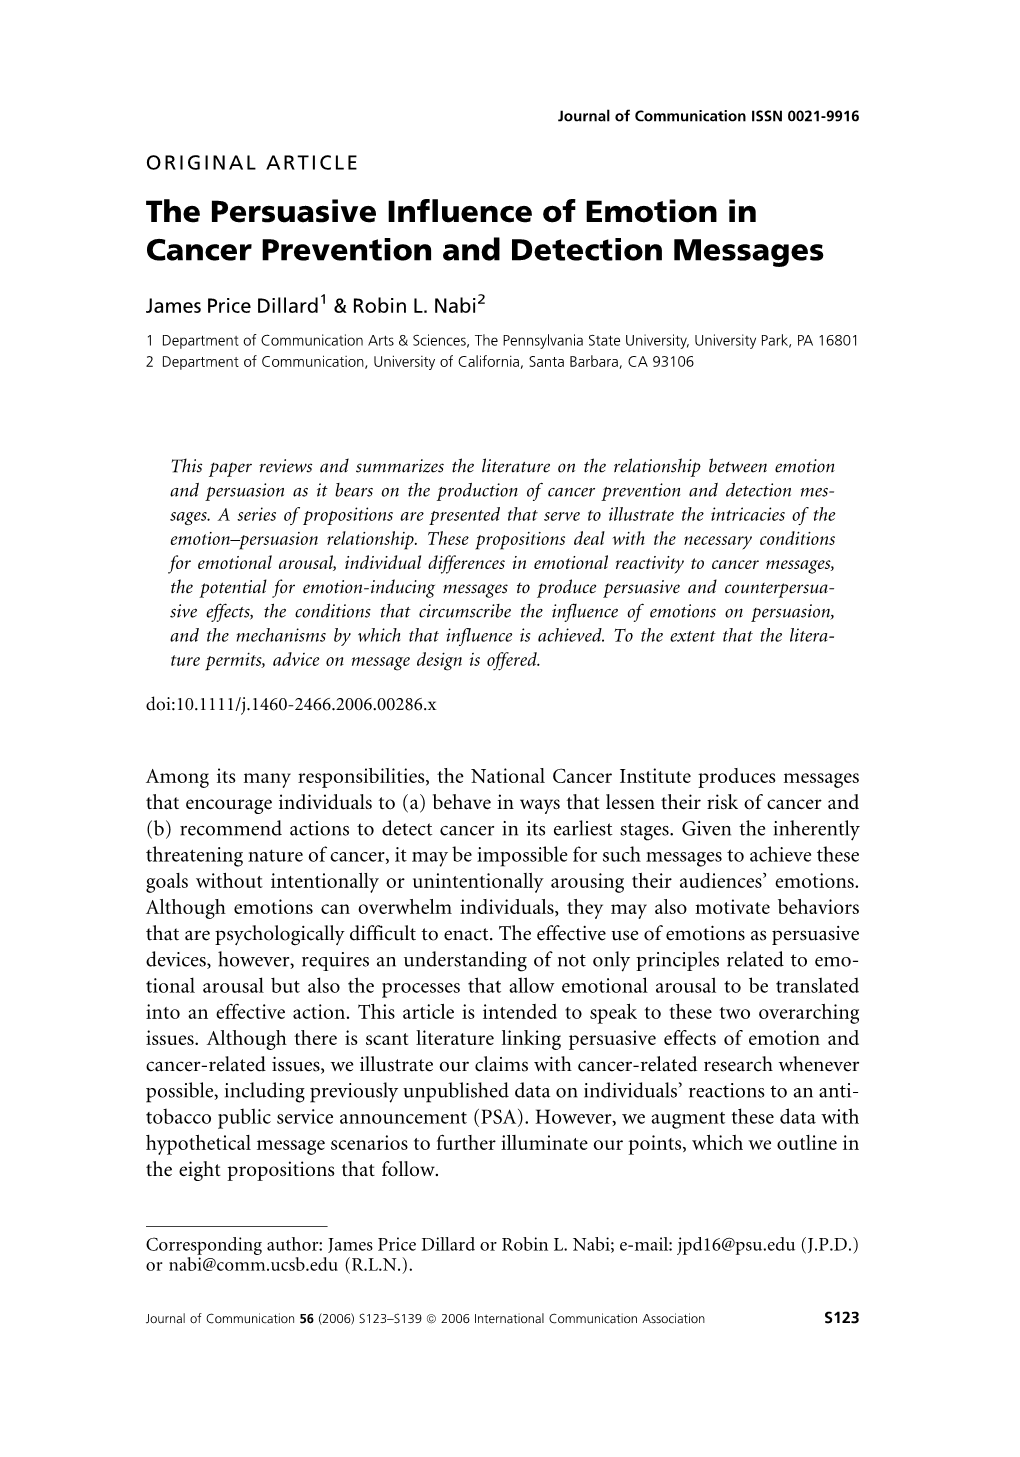 The Persuasive Influence of Emotion in Cancer Prevention and Detection